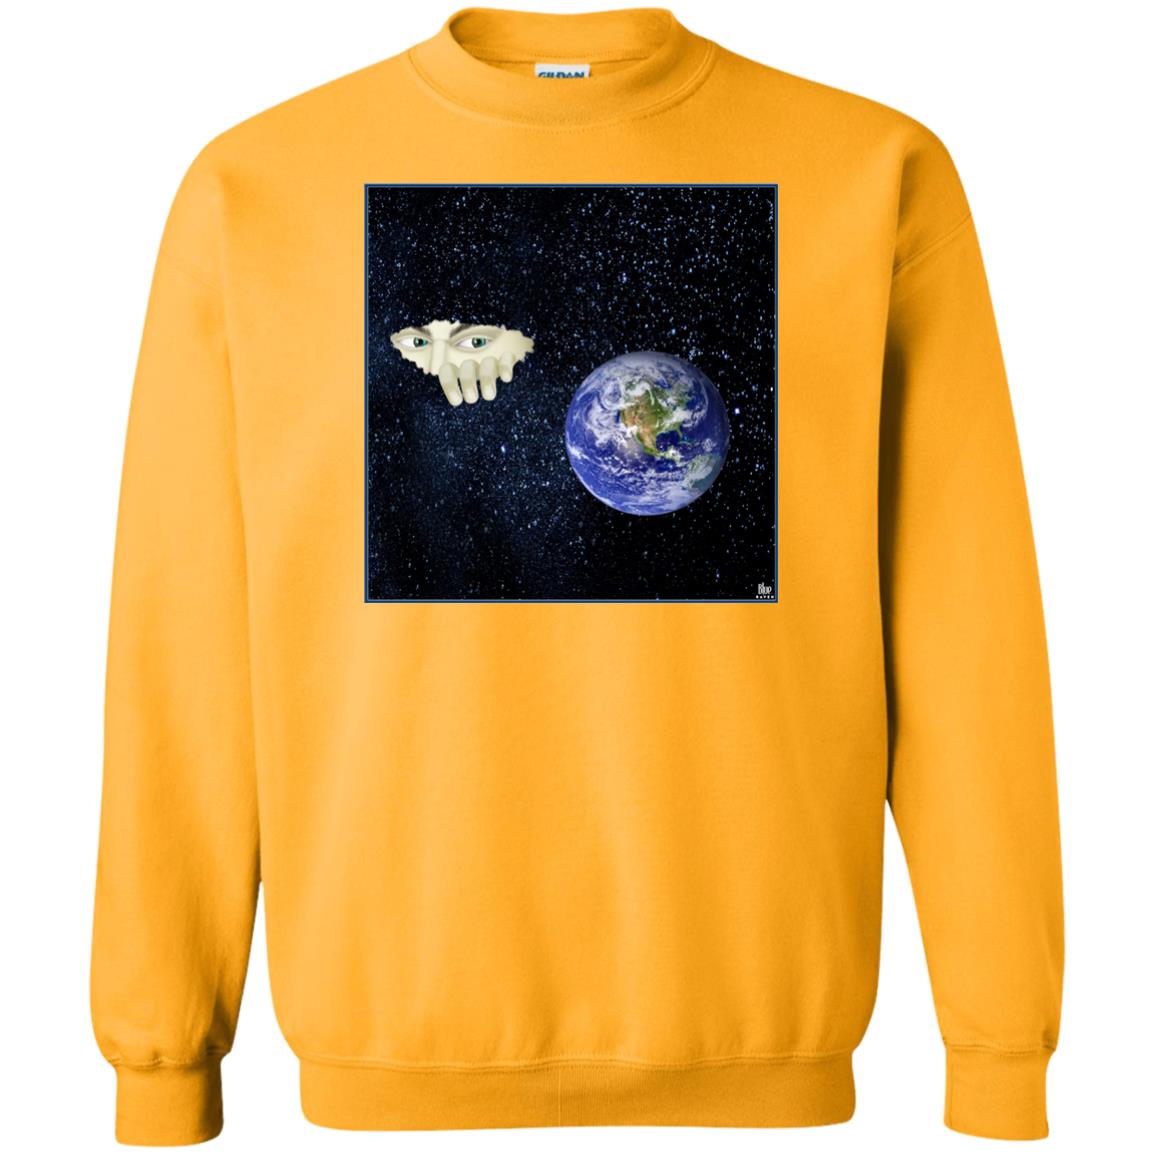 SOMEWHERE OUT THERE - Men's Crew Neck Sweatshirt